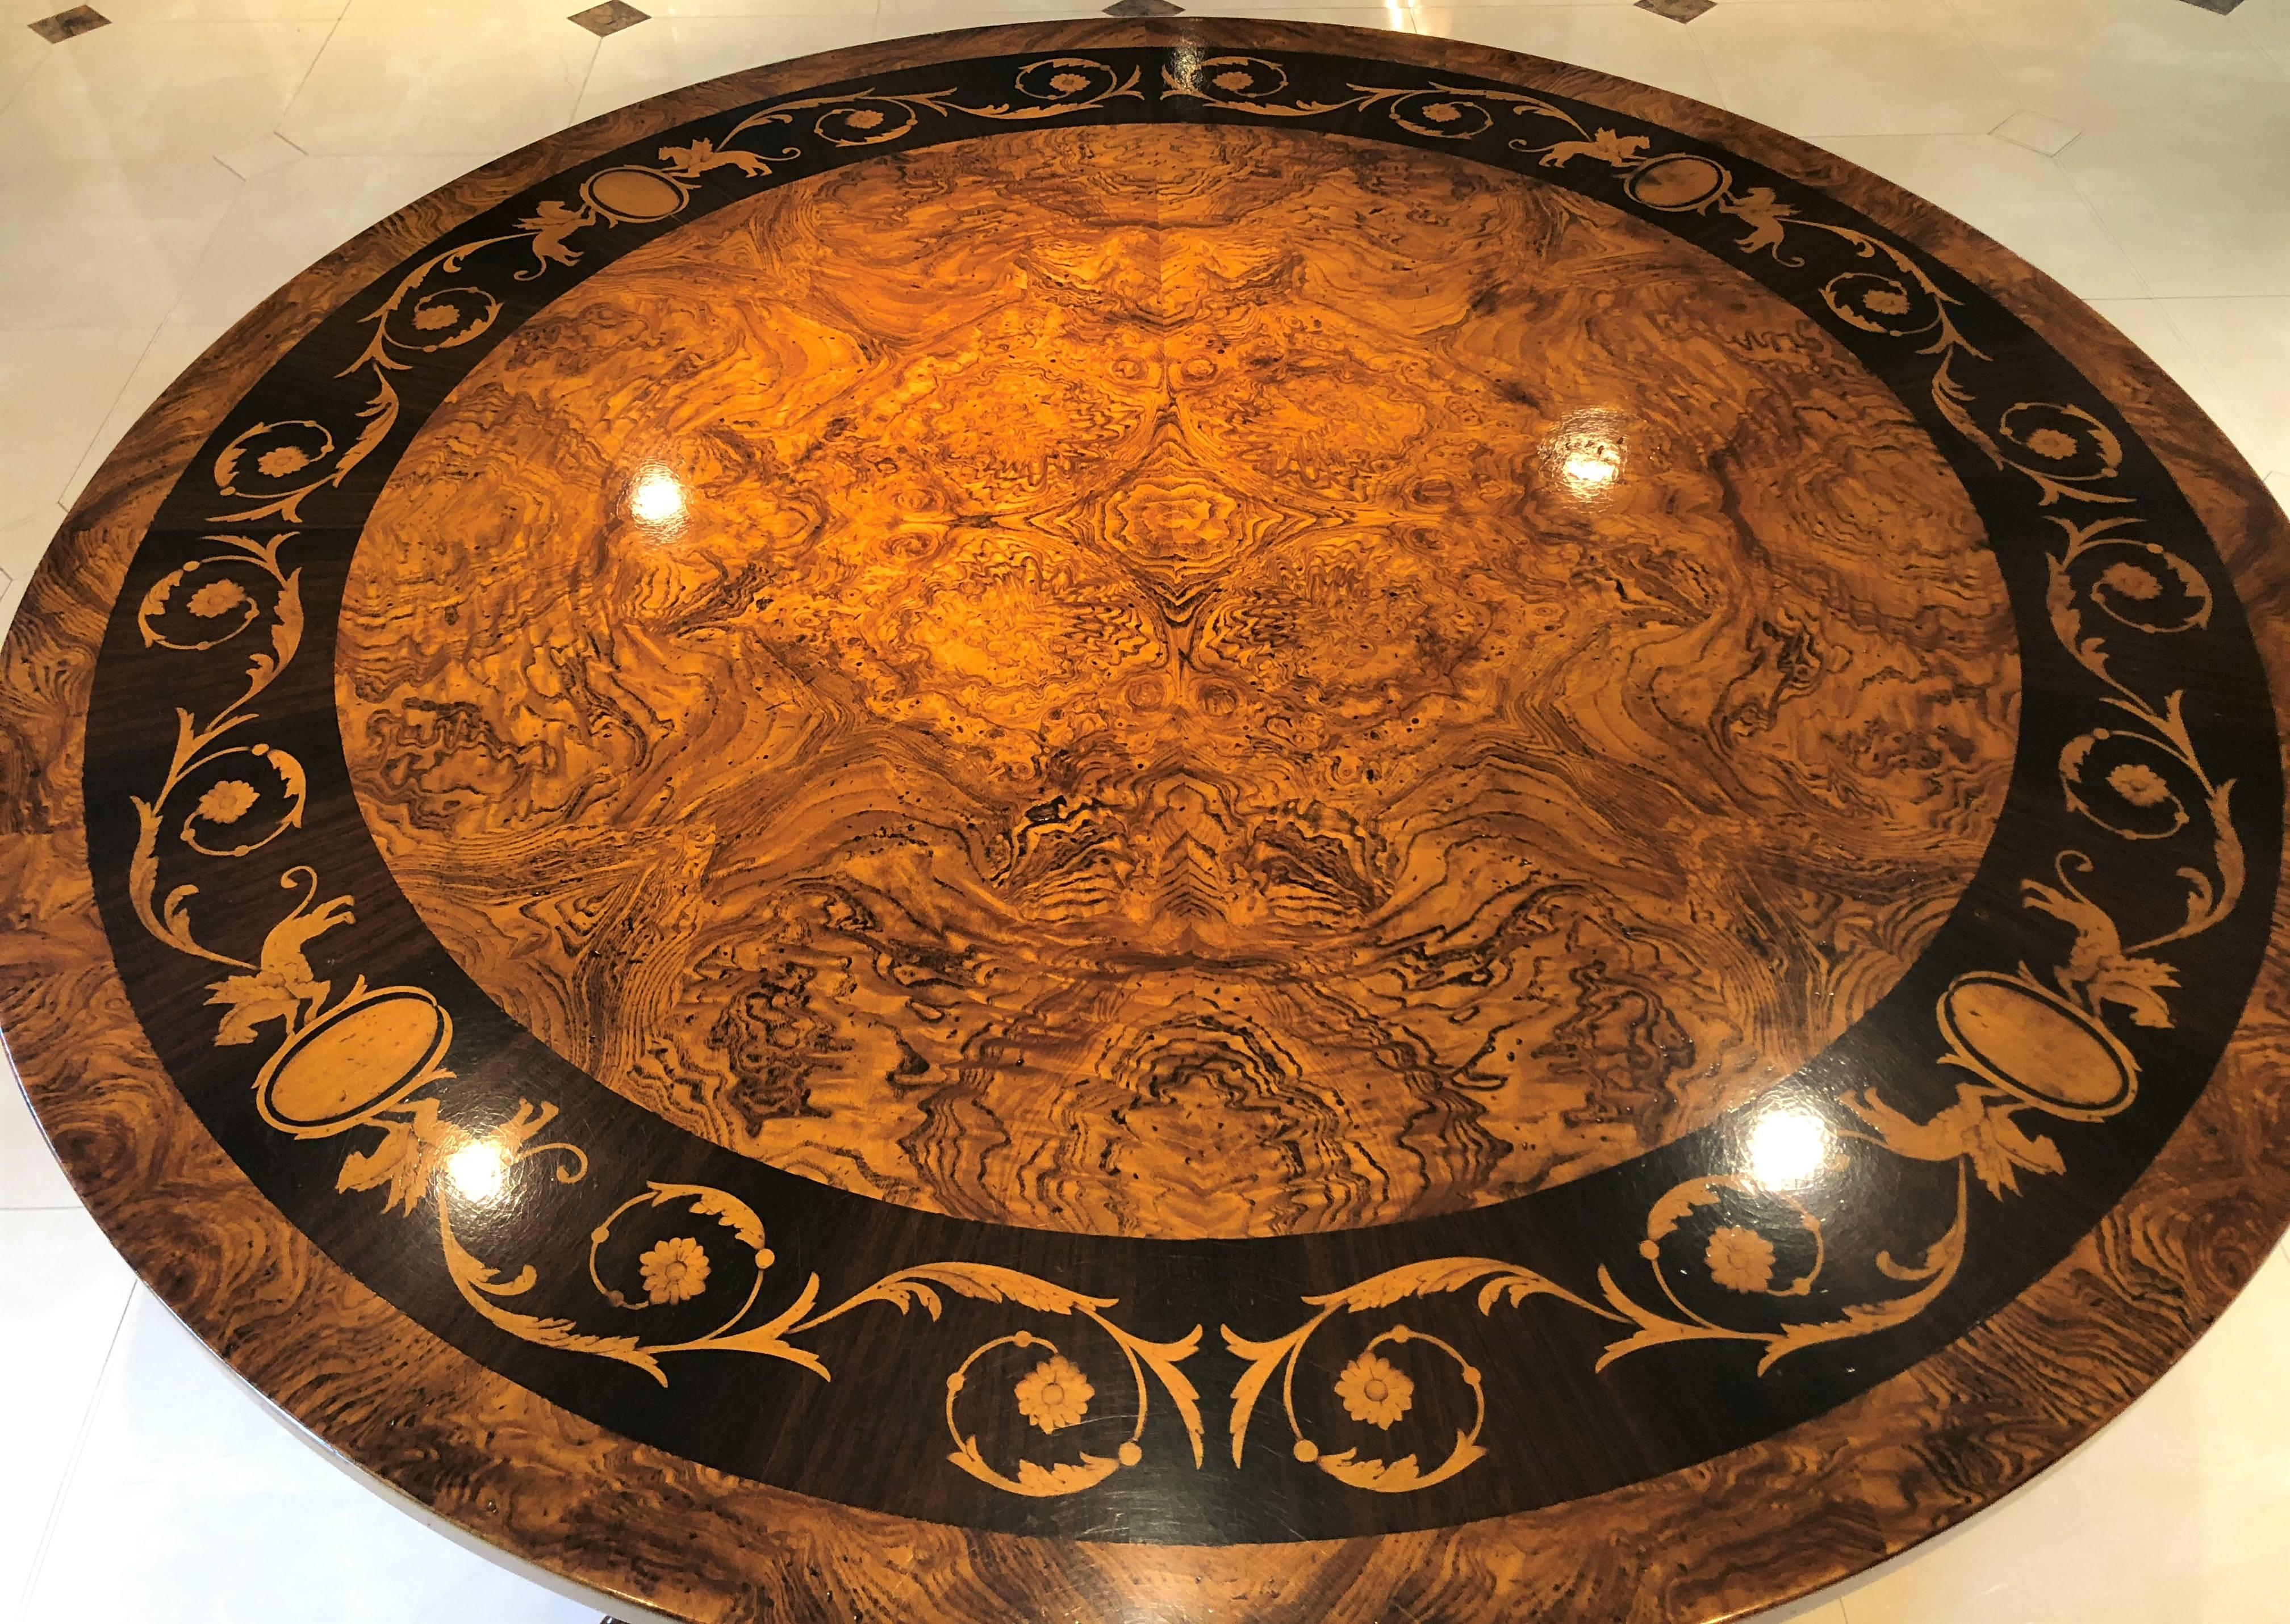 Regency Neoclassical Style Inlaid Foyer Top Round Centre Table Francesco Molon 2